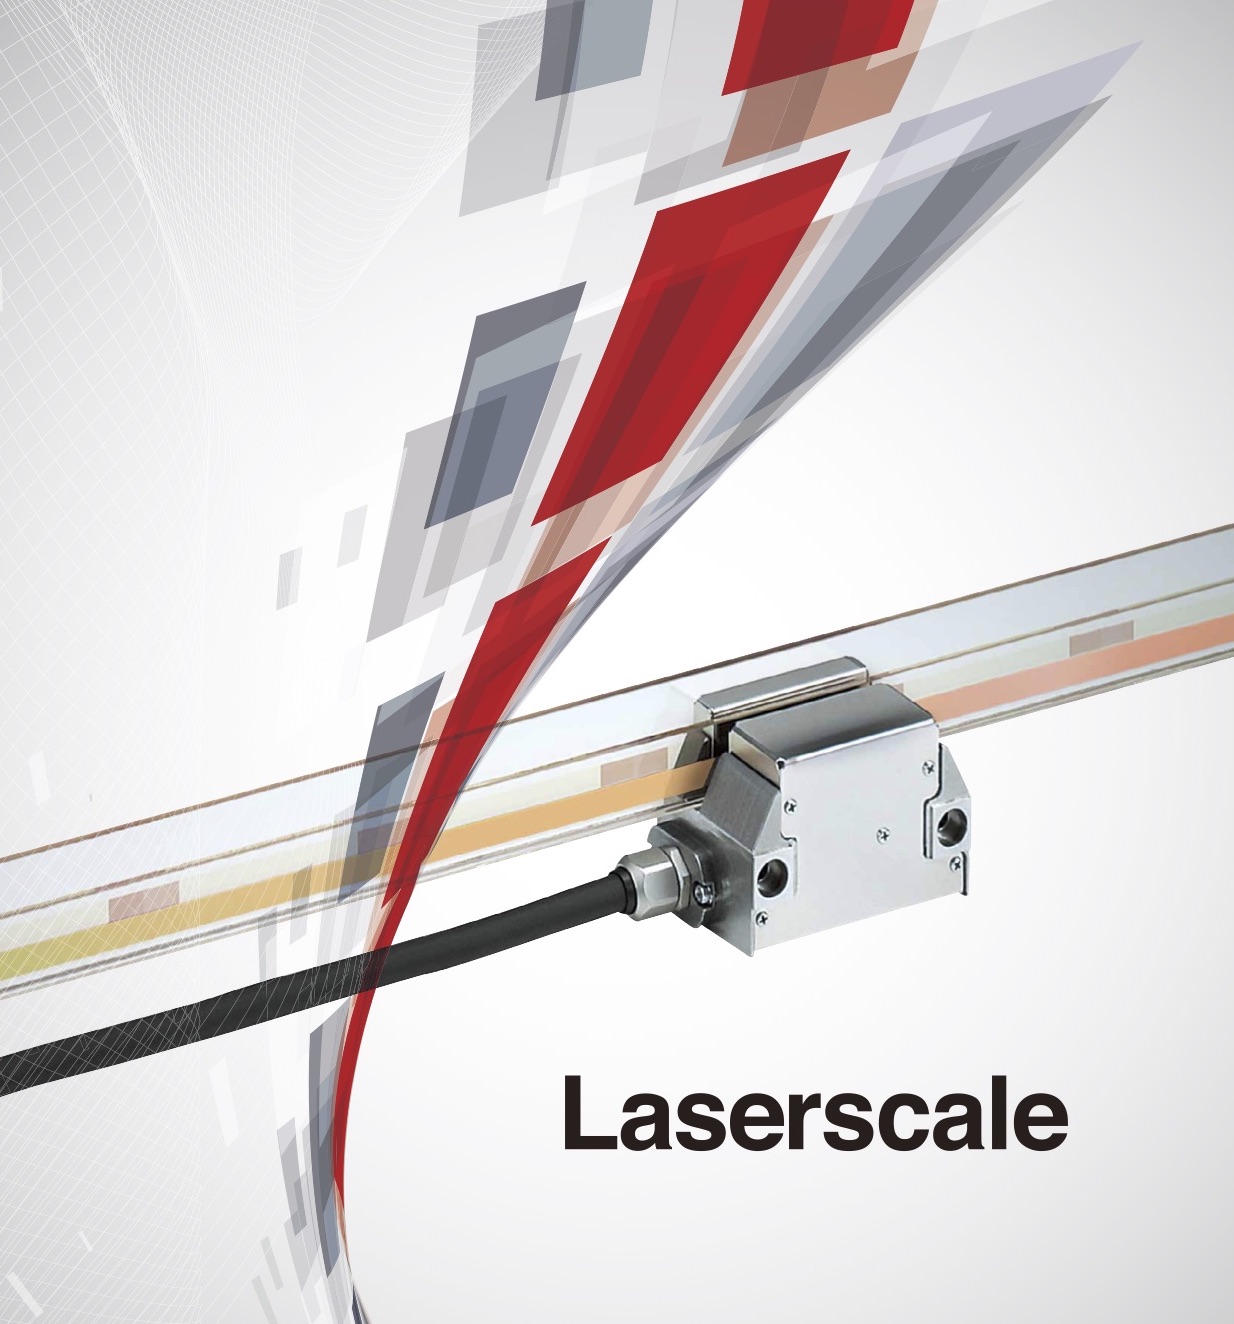 Laserscale